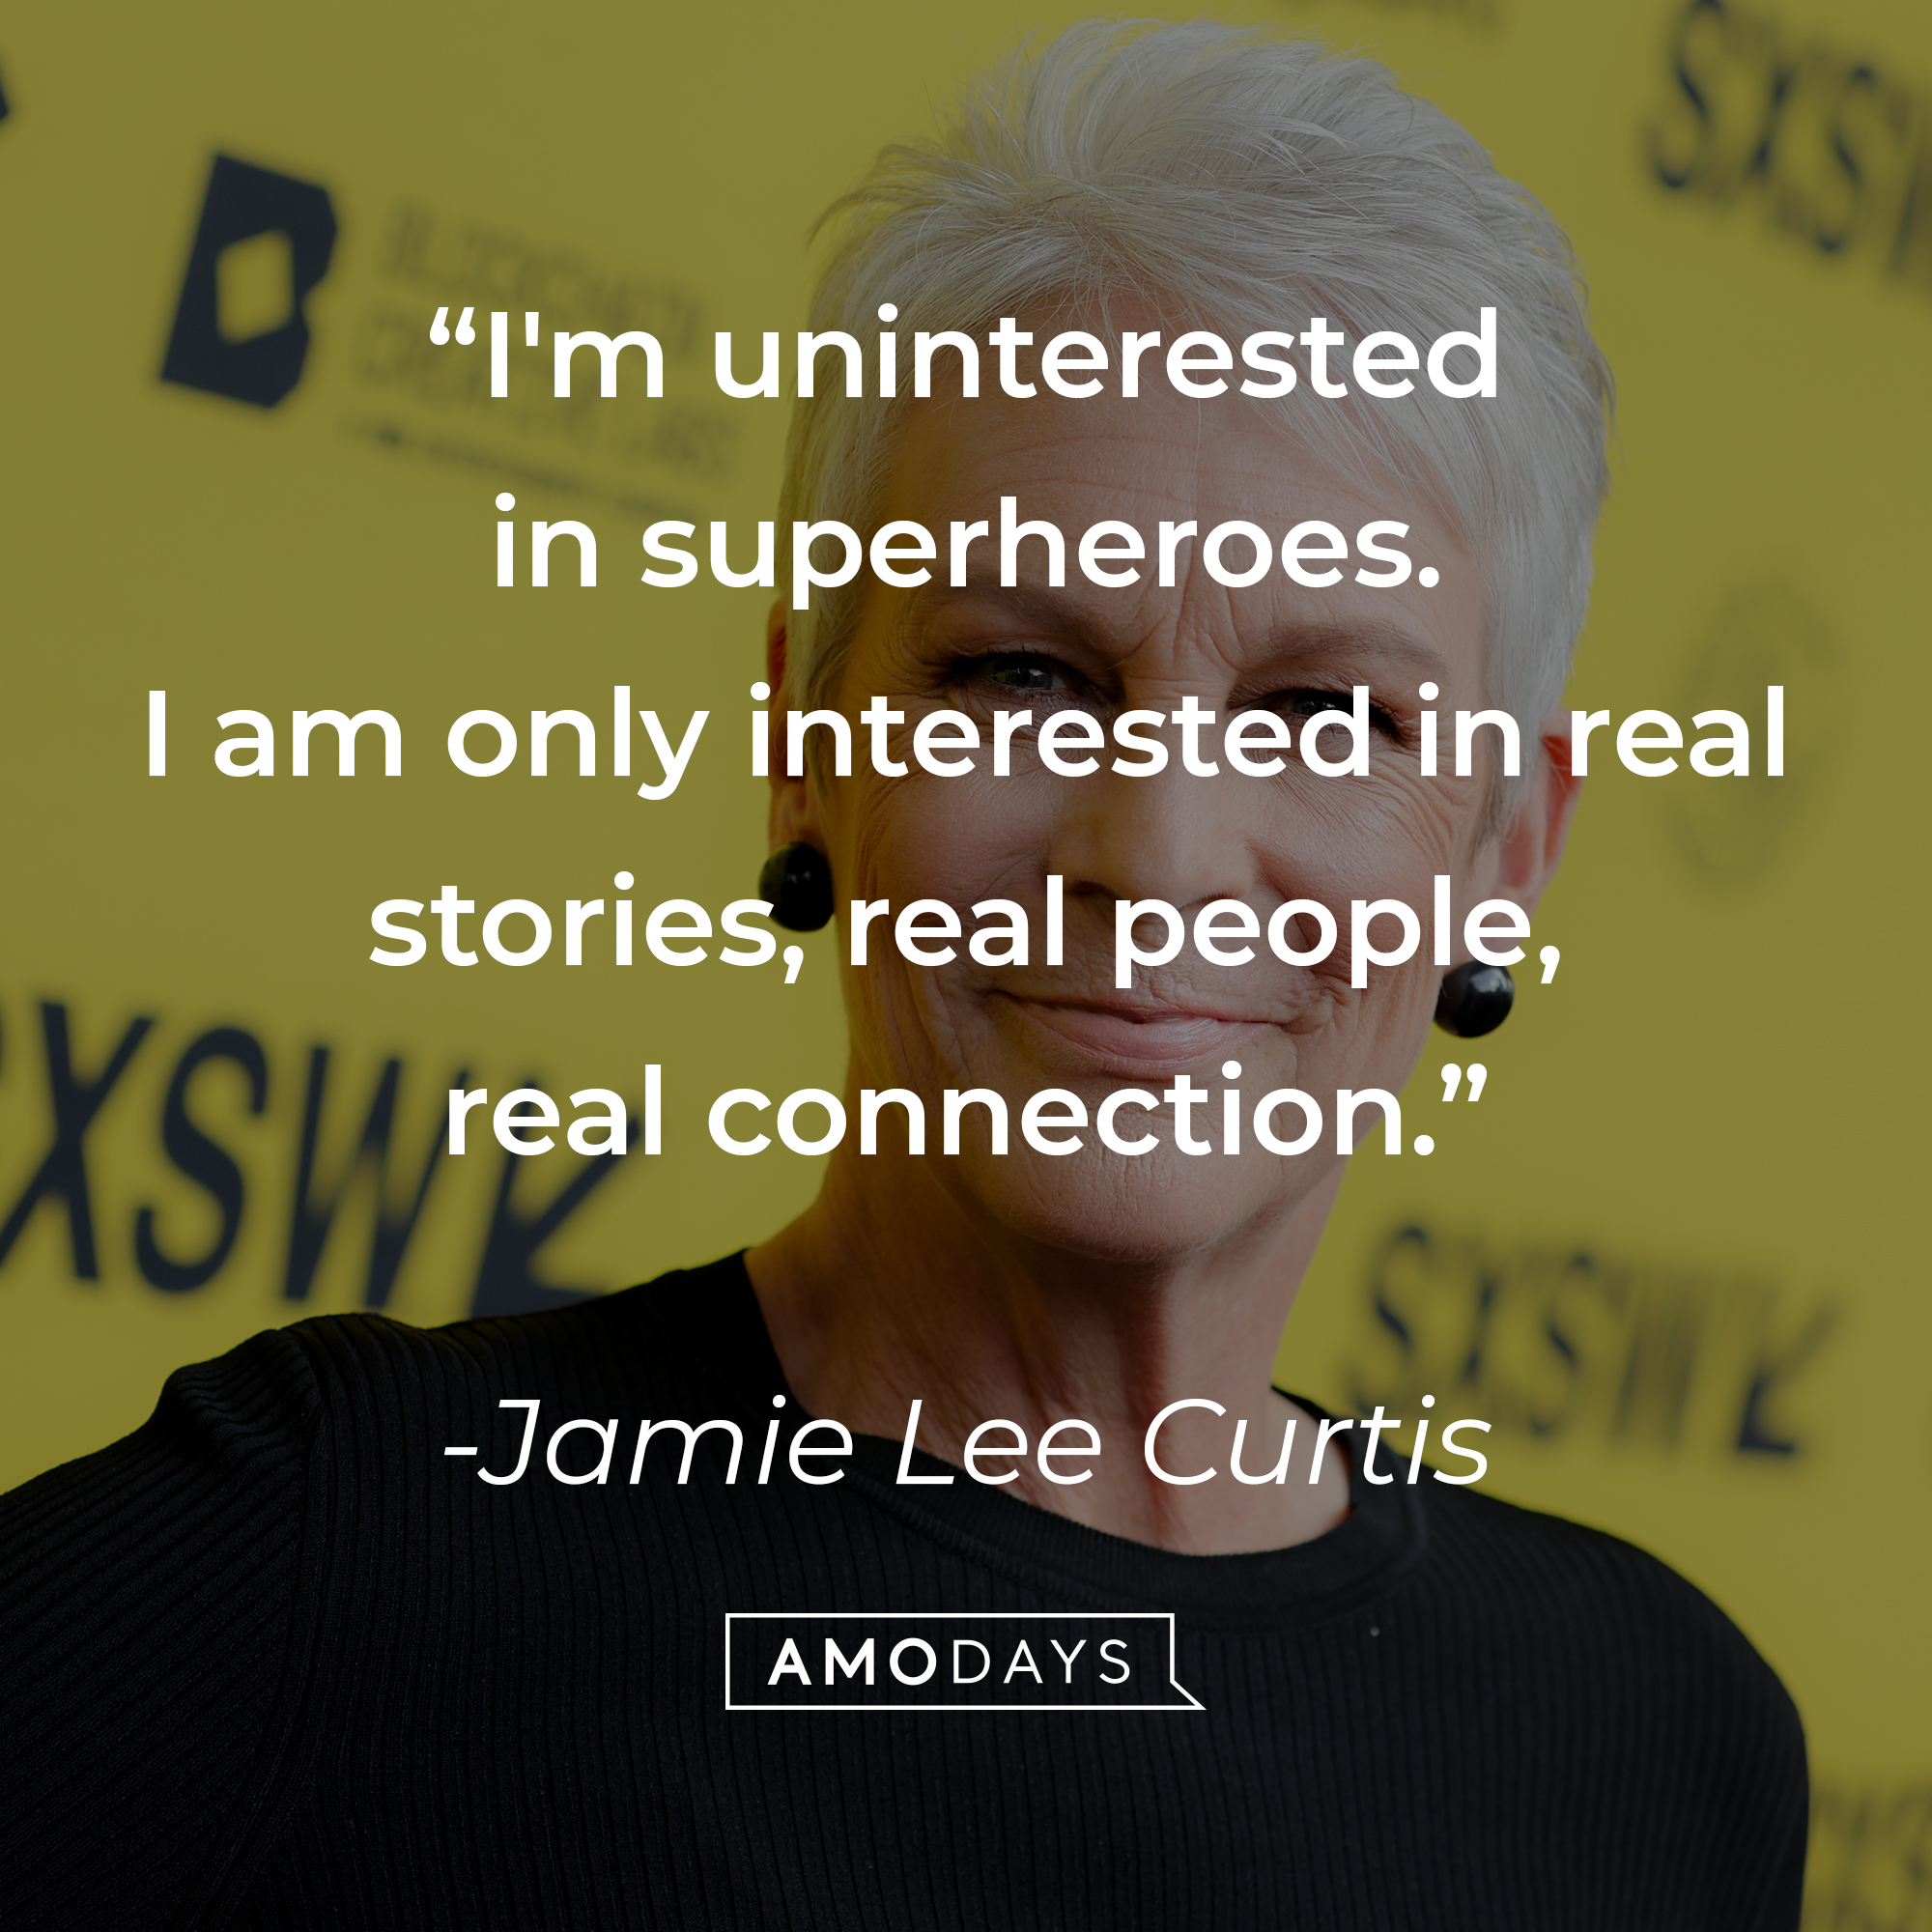 An image of Jamie Lee Curtis, with her quote: “I'm uninterested in superheroes. I am only interested in real stories, real people, real connection.”  | Source: Getty Images